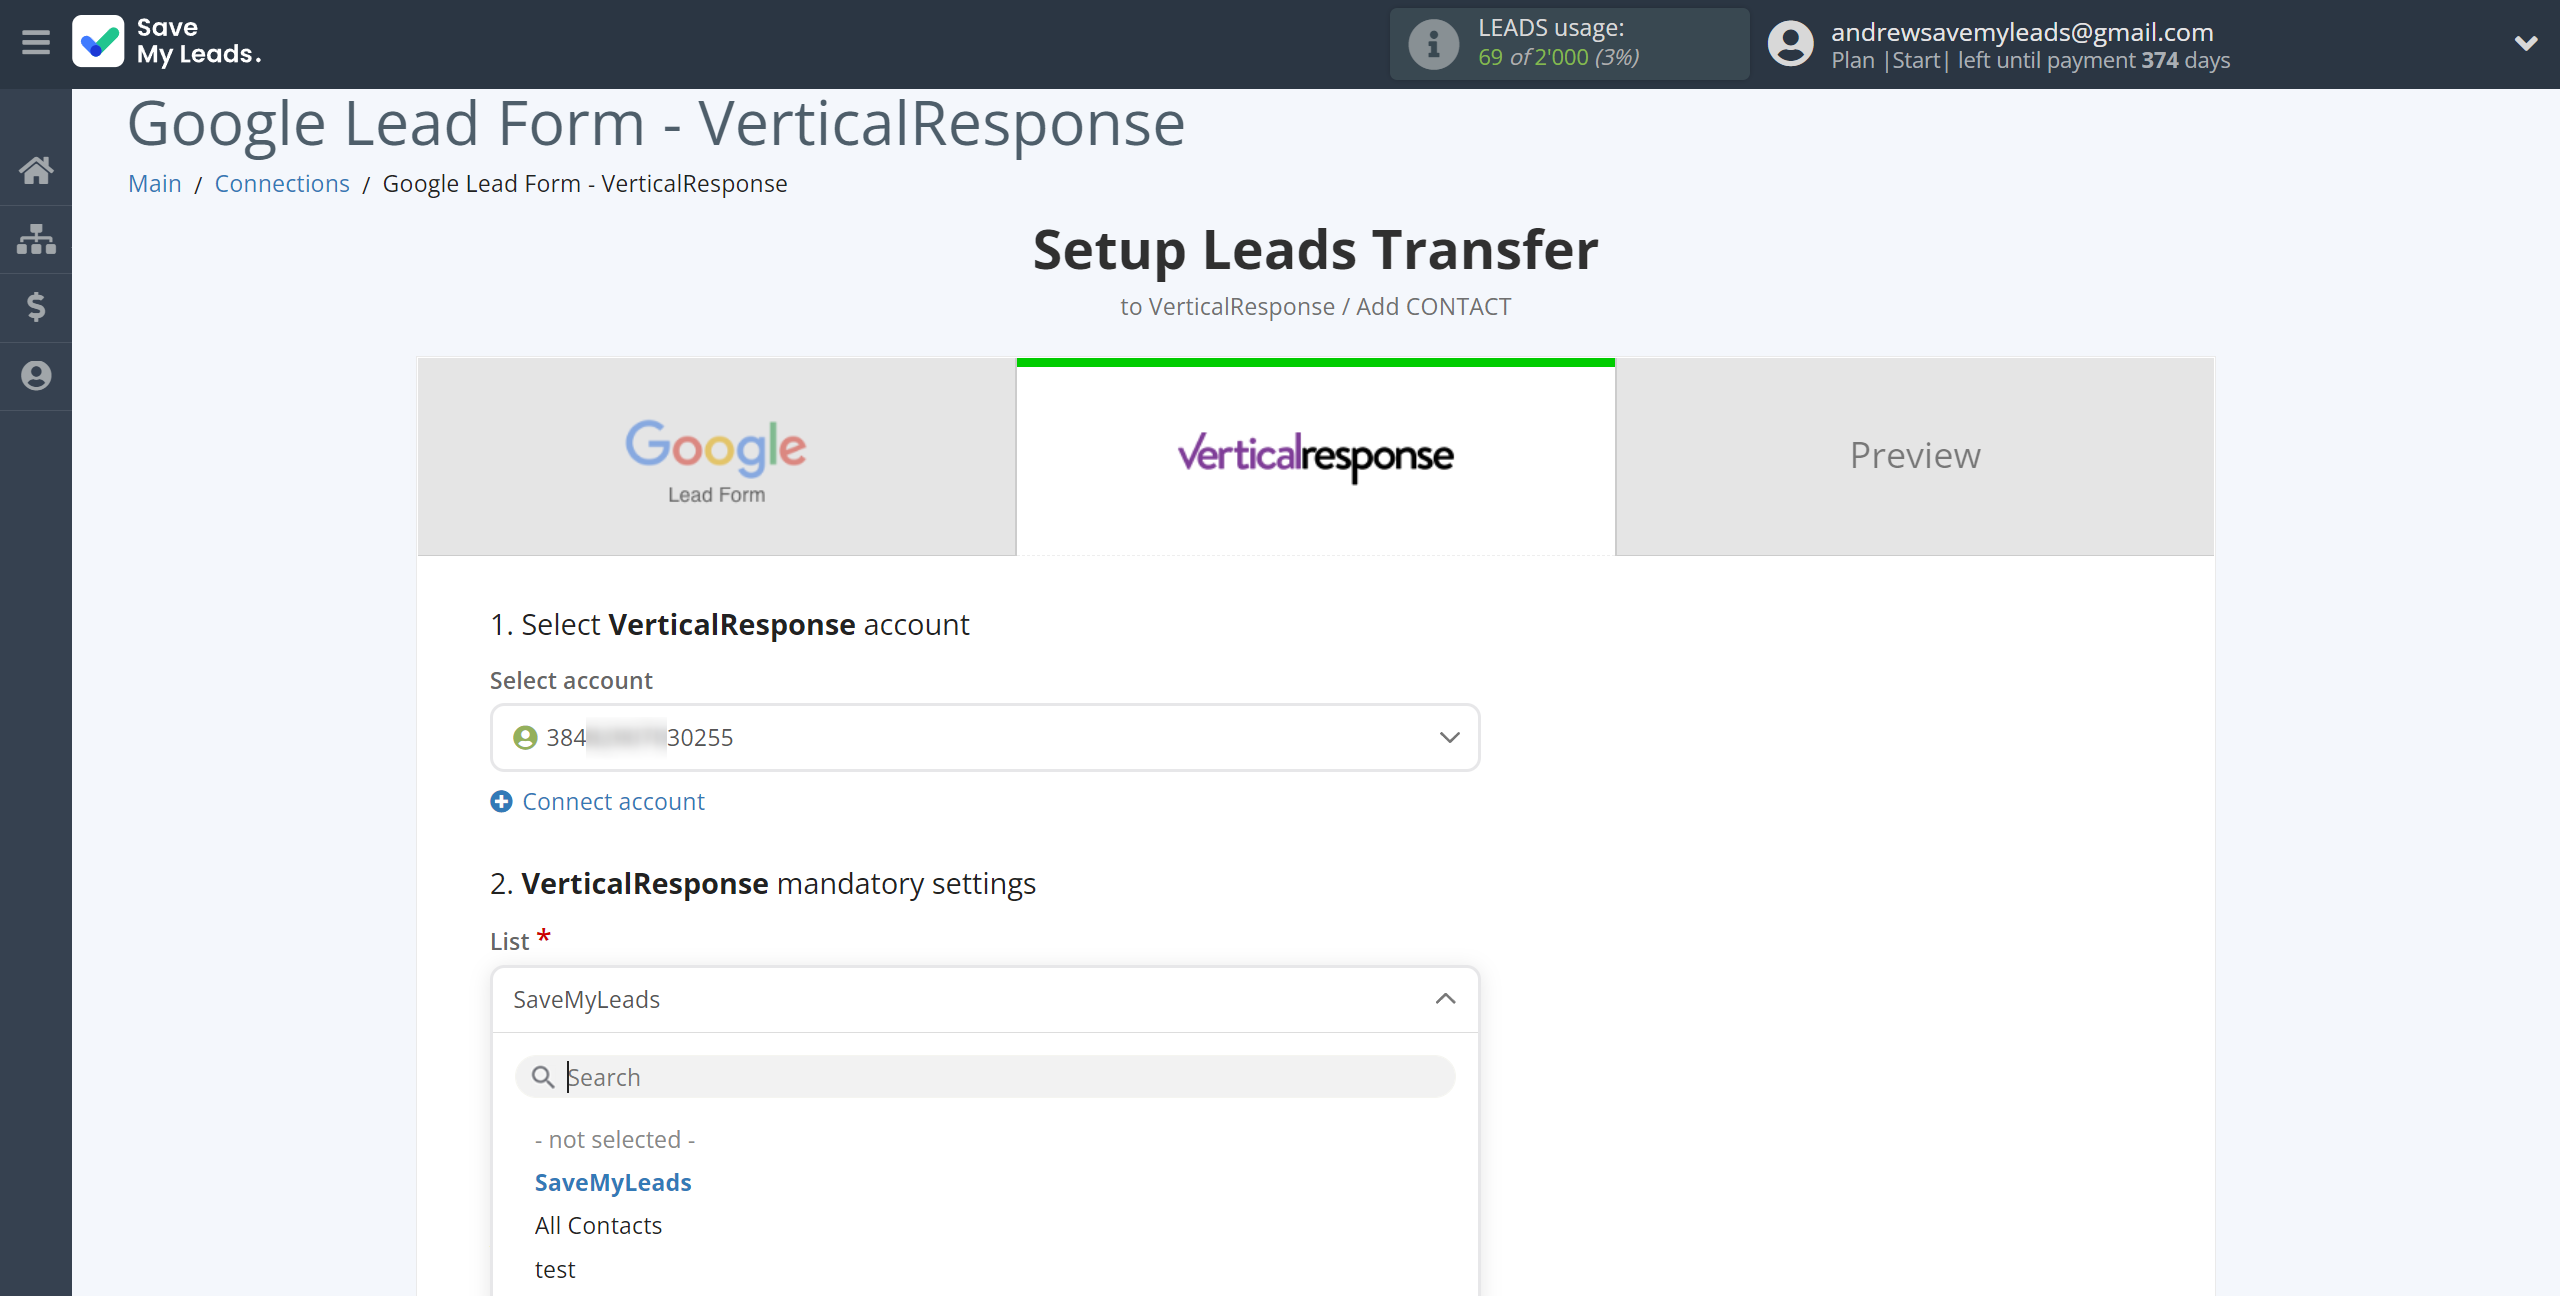 How to Connect Google Lead Form with VerticalResponse | Assigning fields